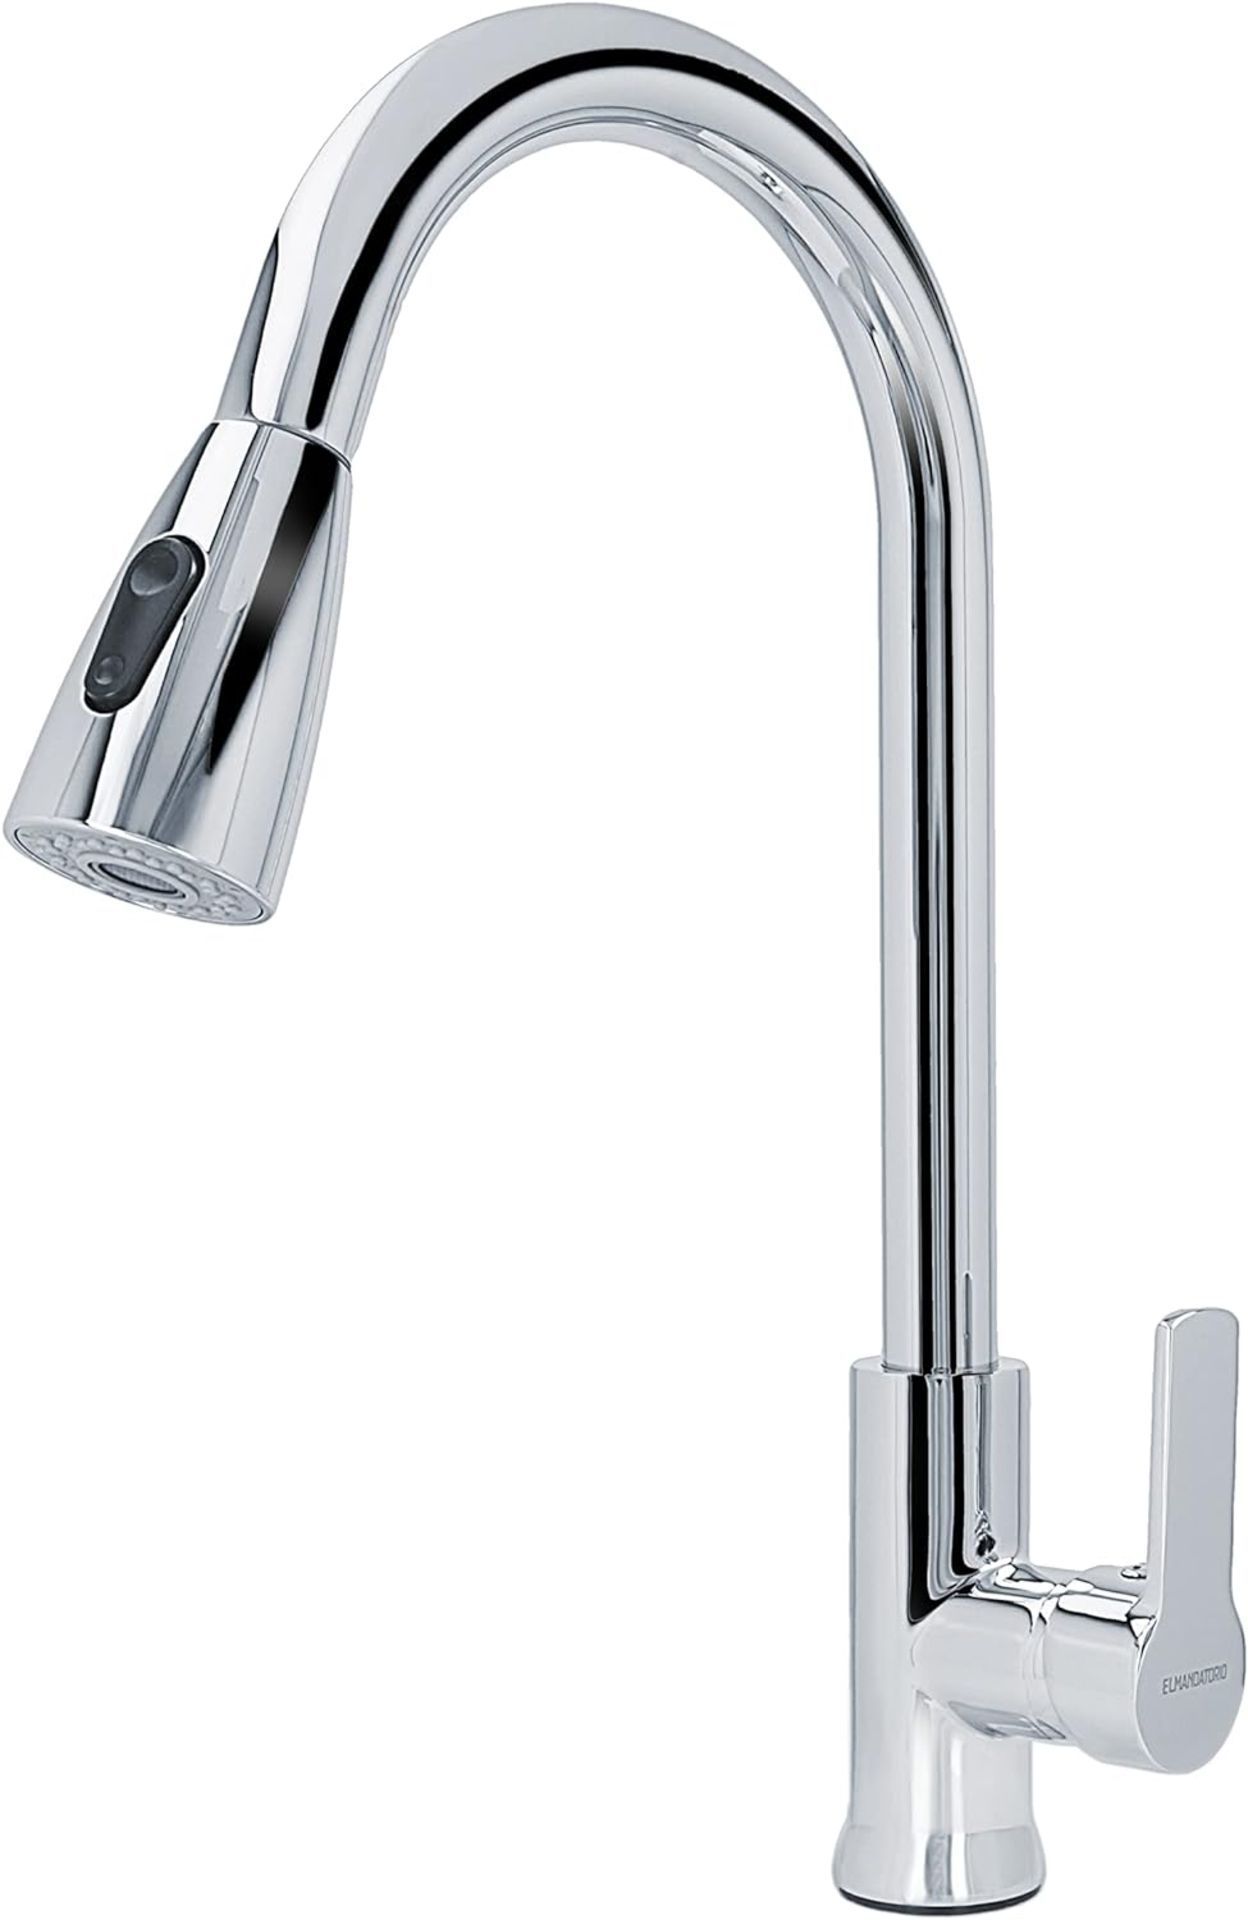 BRAND NEW ELMANDATORIO BRASS MATERIAL KITCHEN FAUCET PULL OUT WATER SPRAY EASYFIT R12.11 - Image 2 of 2